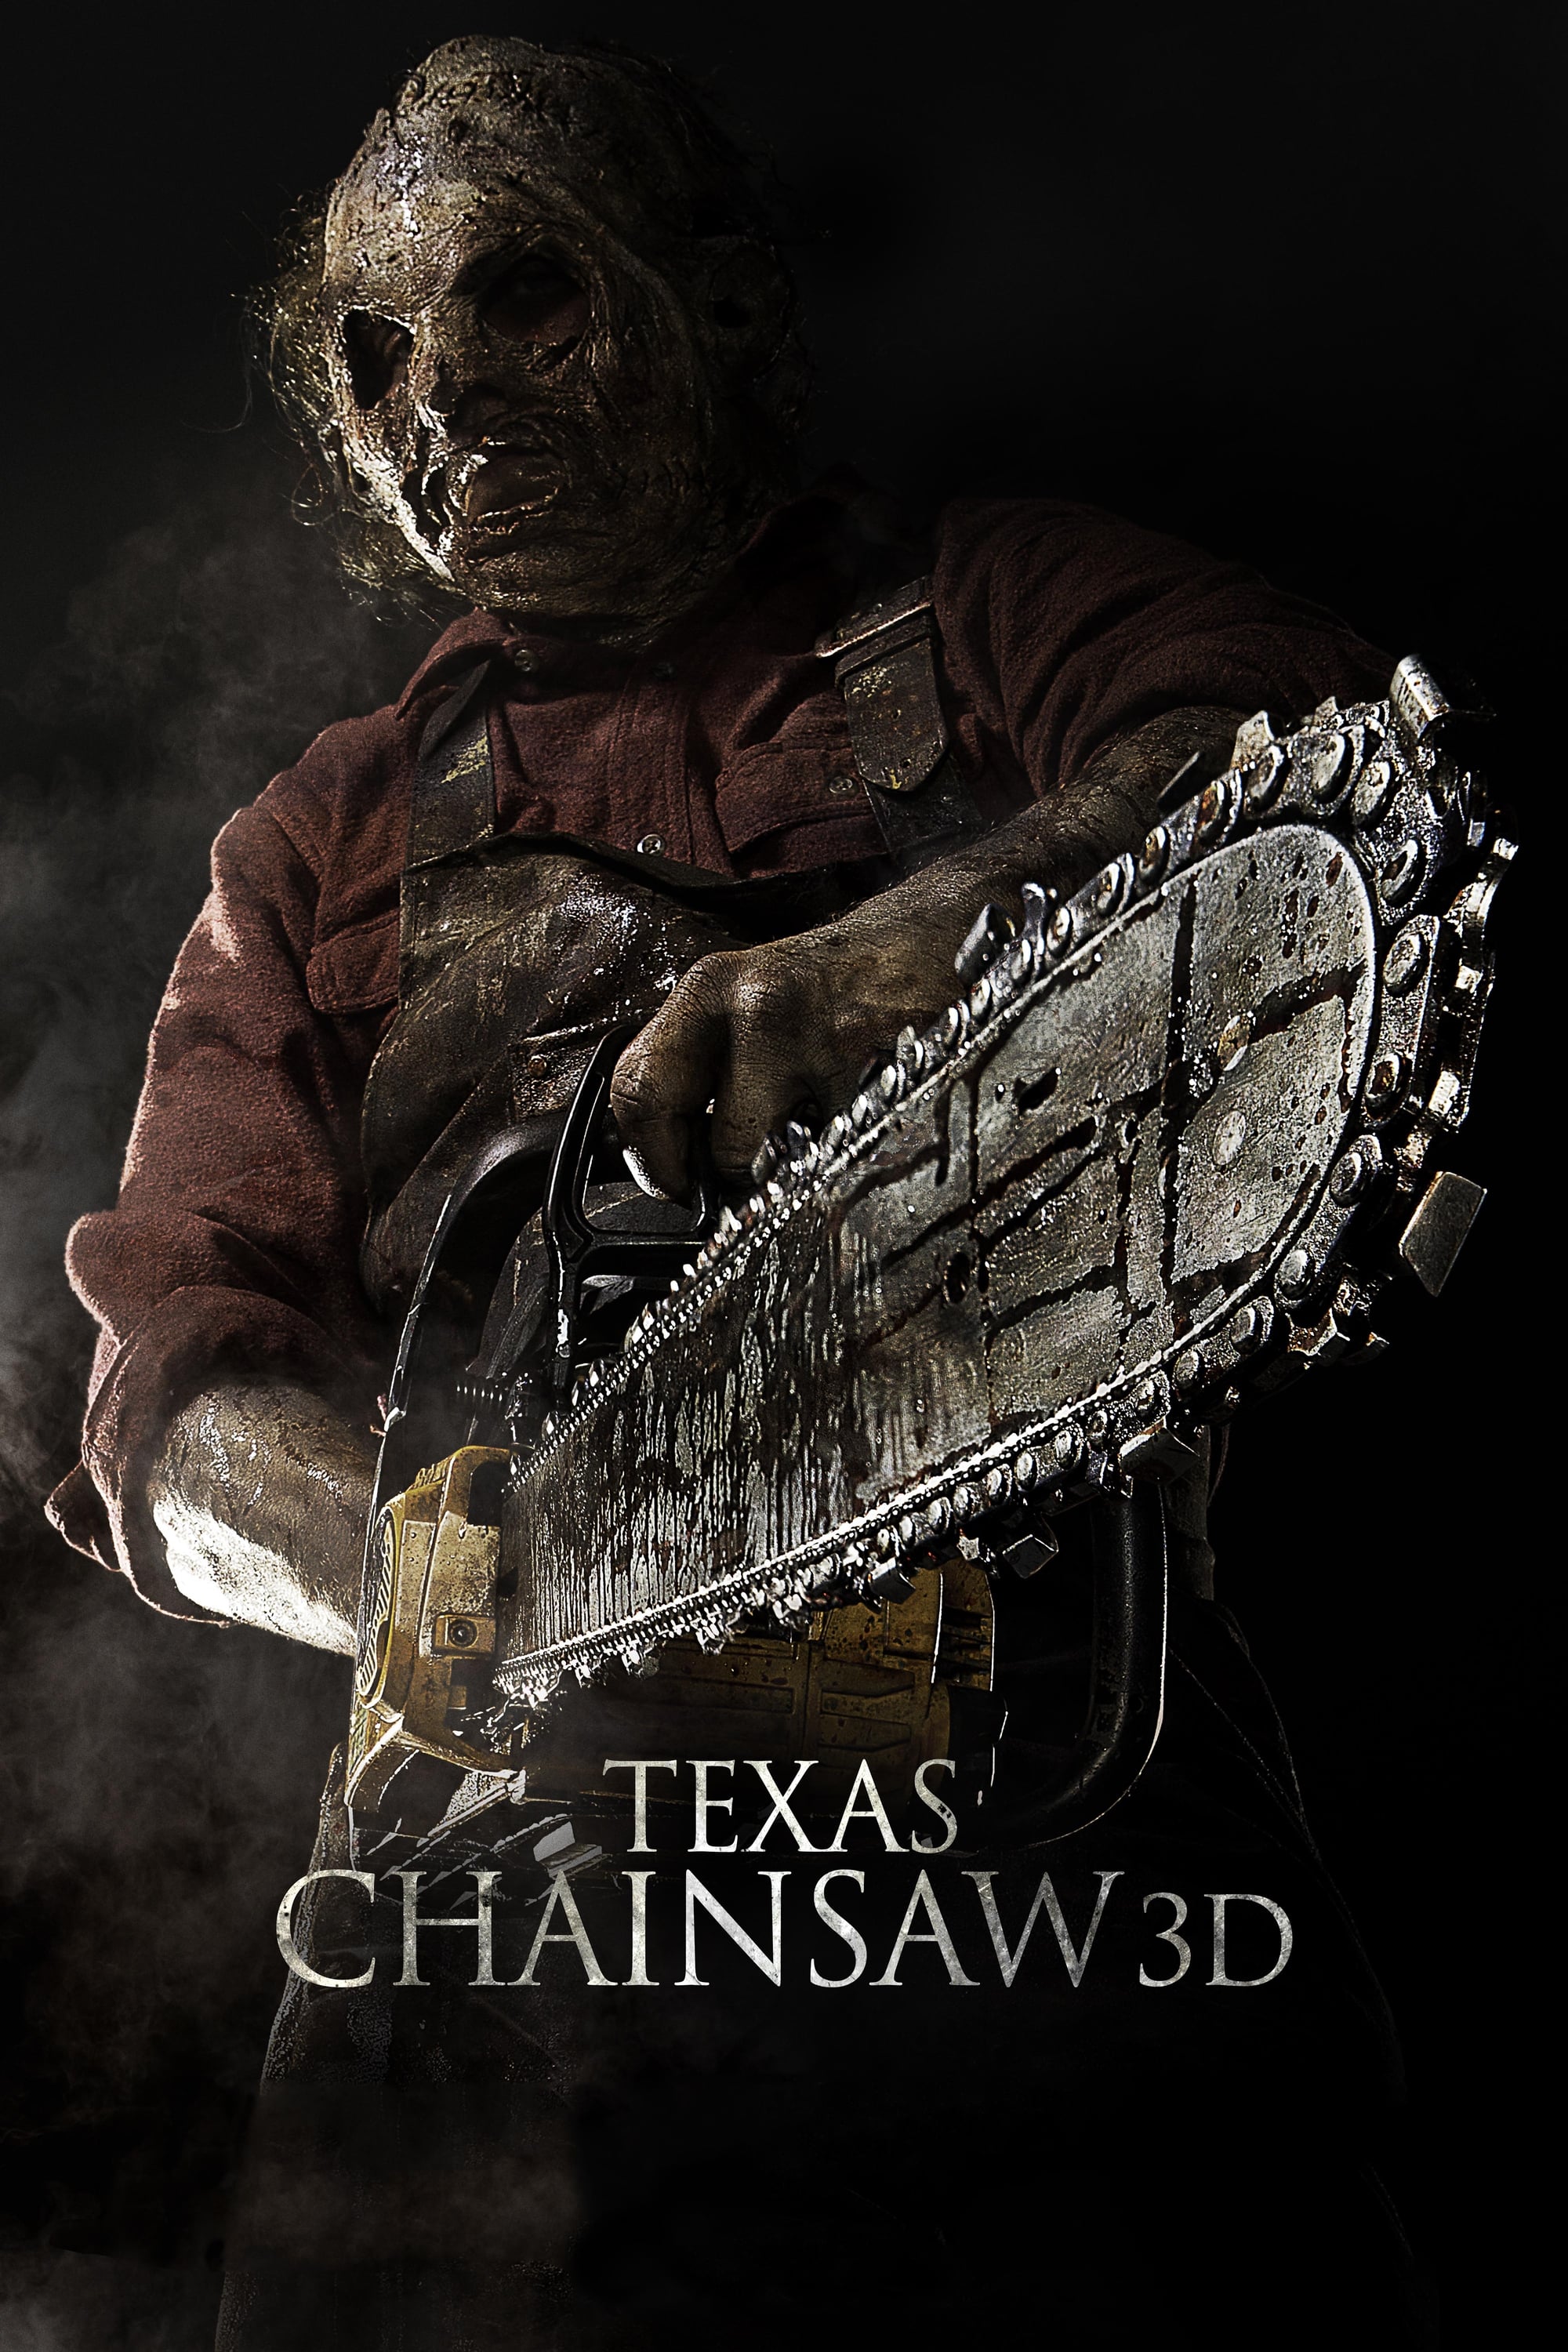 Image for movie Texas Chainsaw 3D